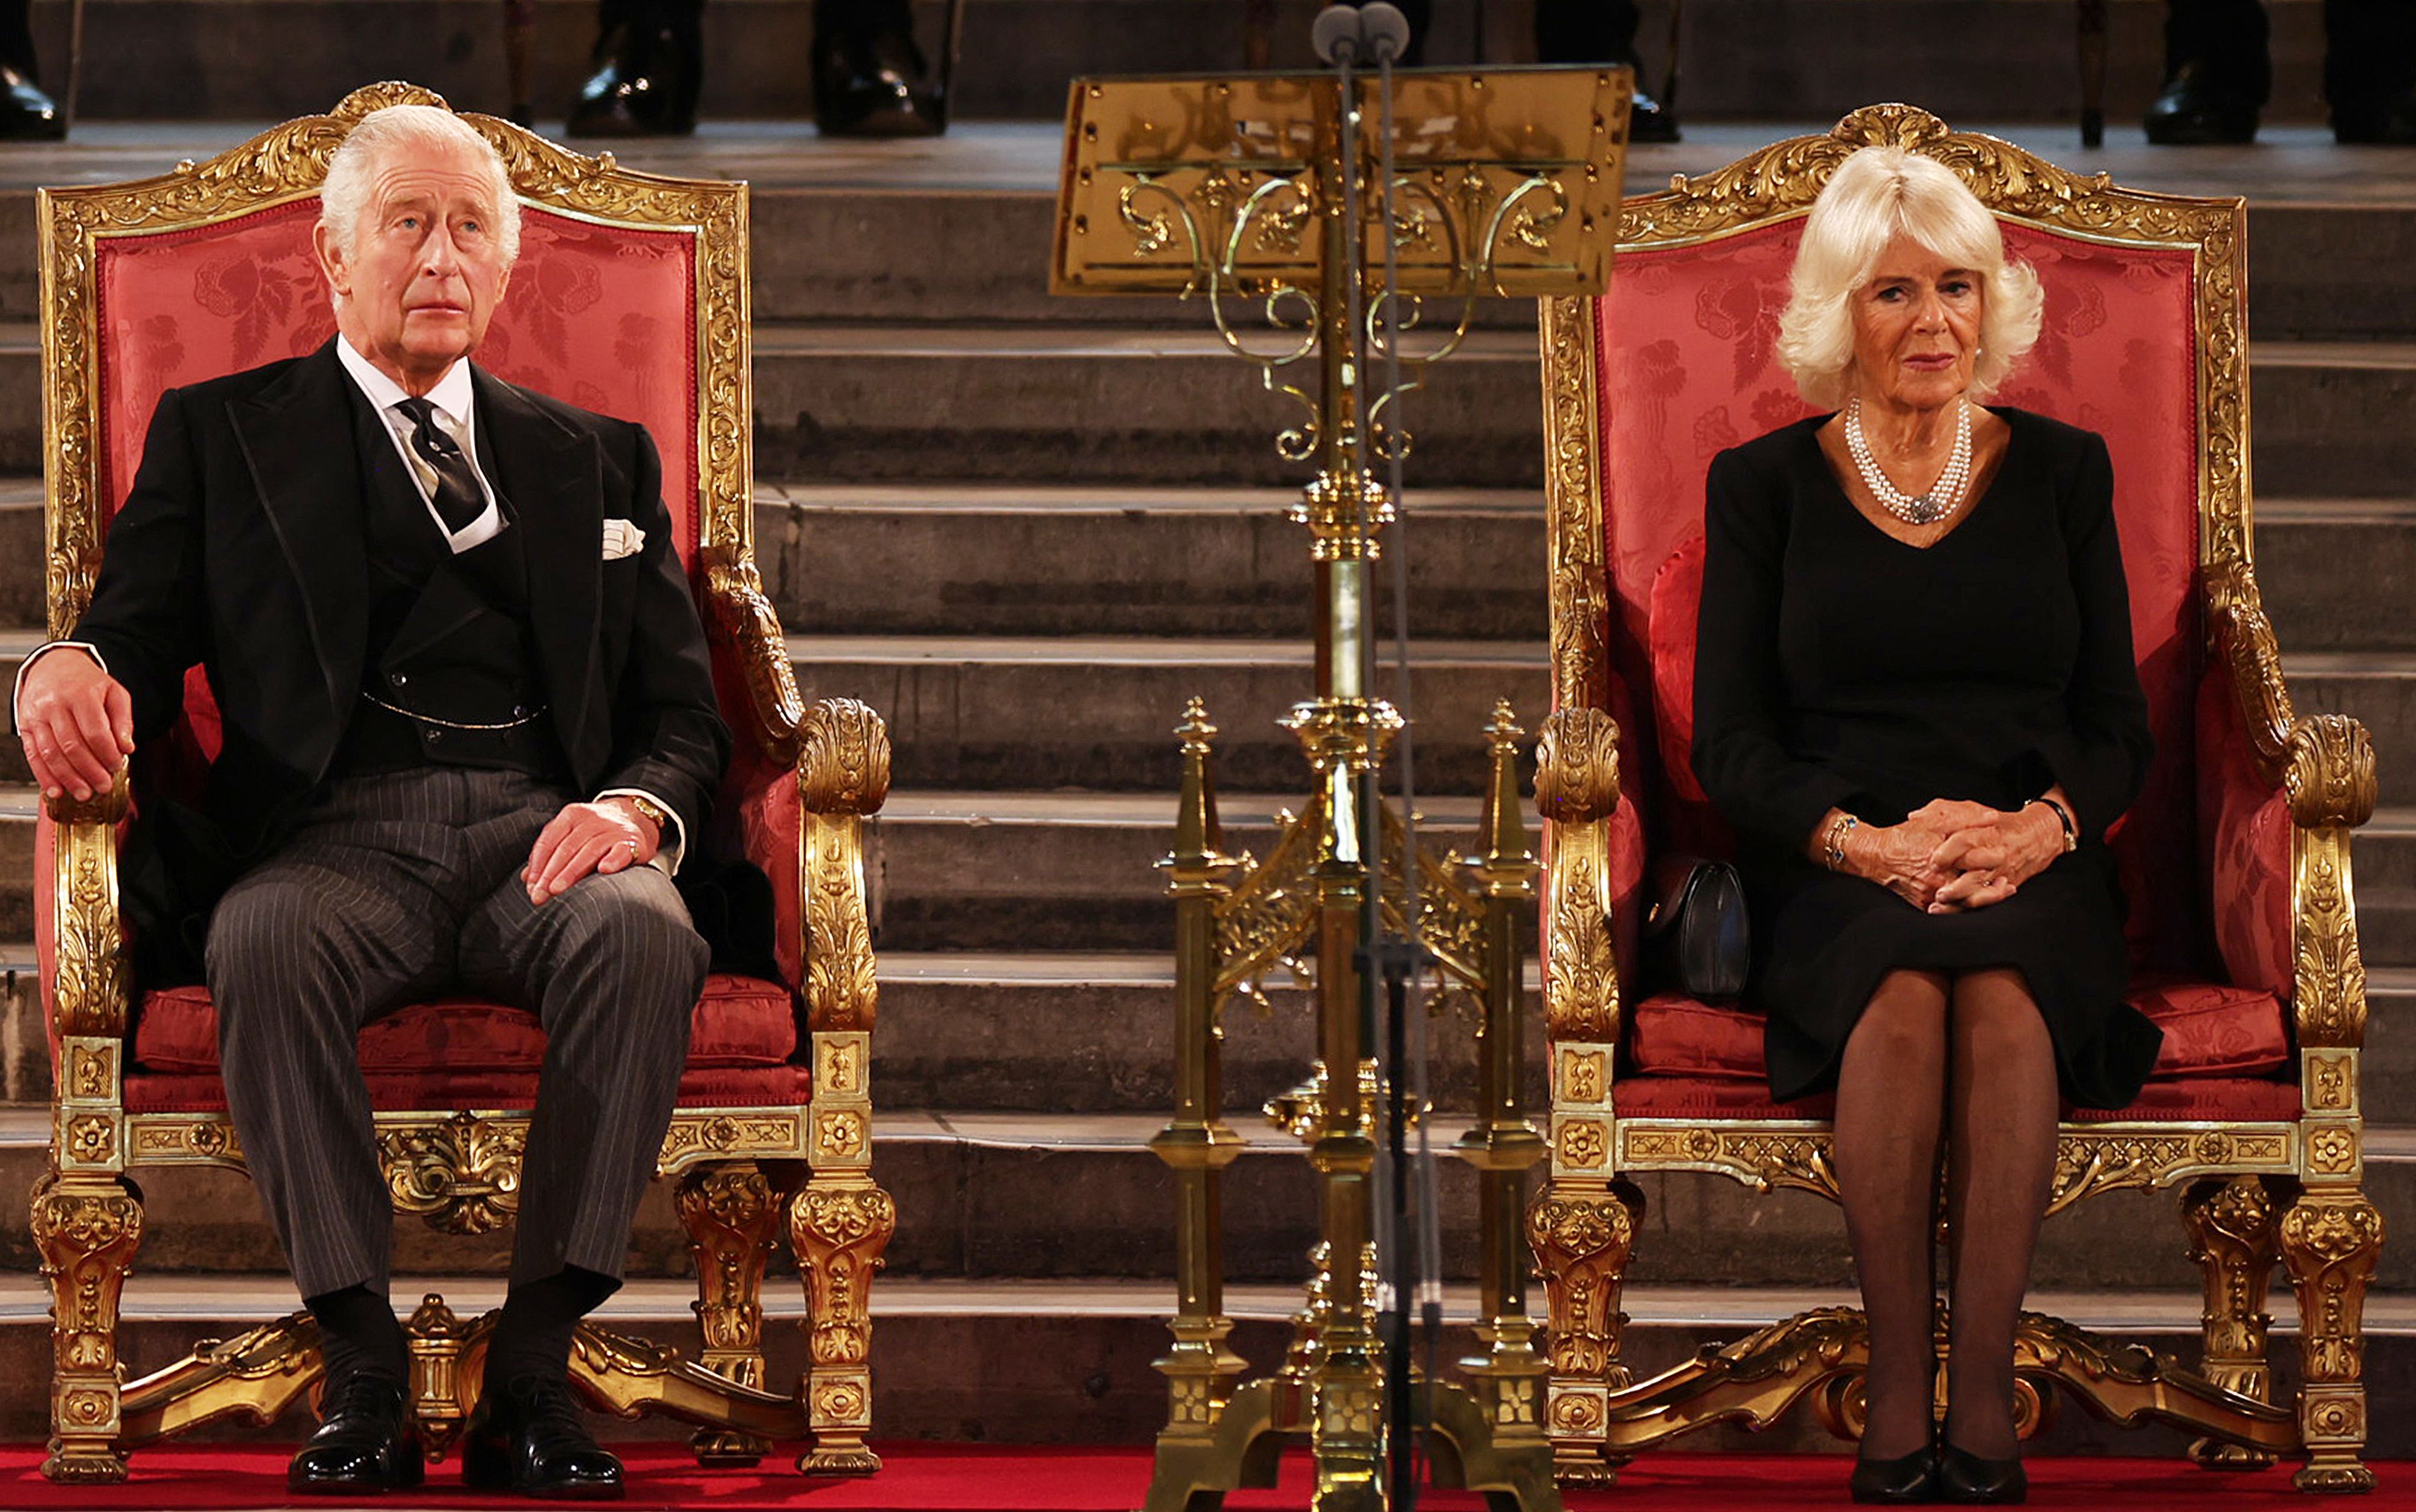 King Charles III and Camilla, Queen Consort, at the presentation of addresses by both Houses of Parliament in Westminster Hall, inside the Palace of Westminster, central London on September 12, 2022 | Source: Getty Images